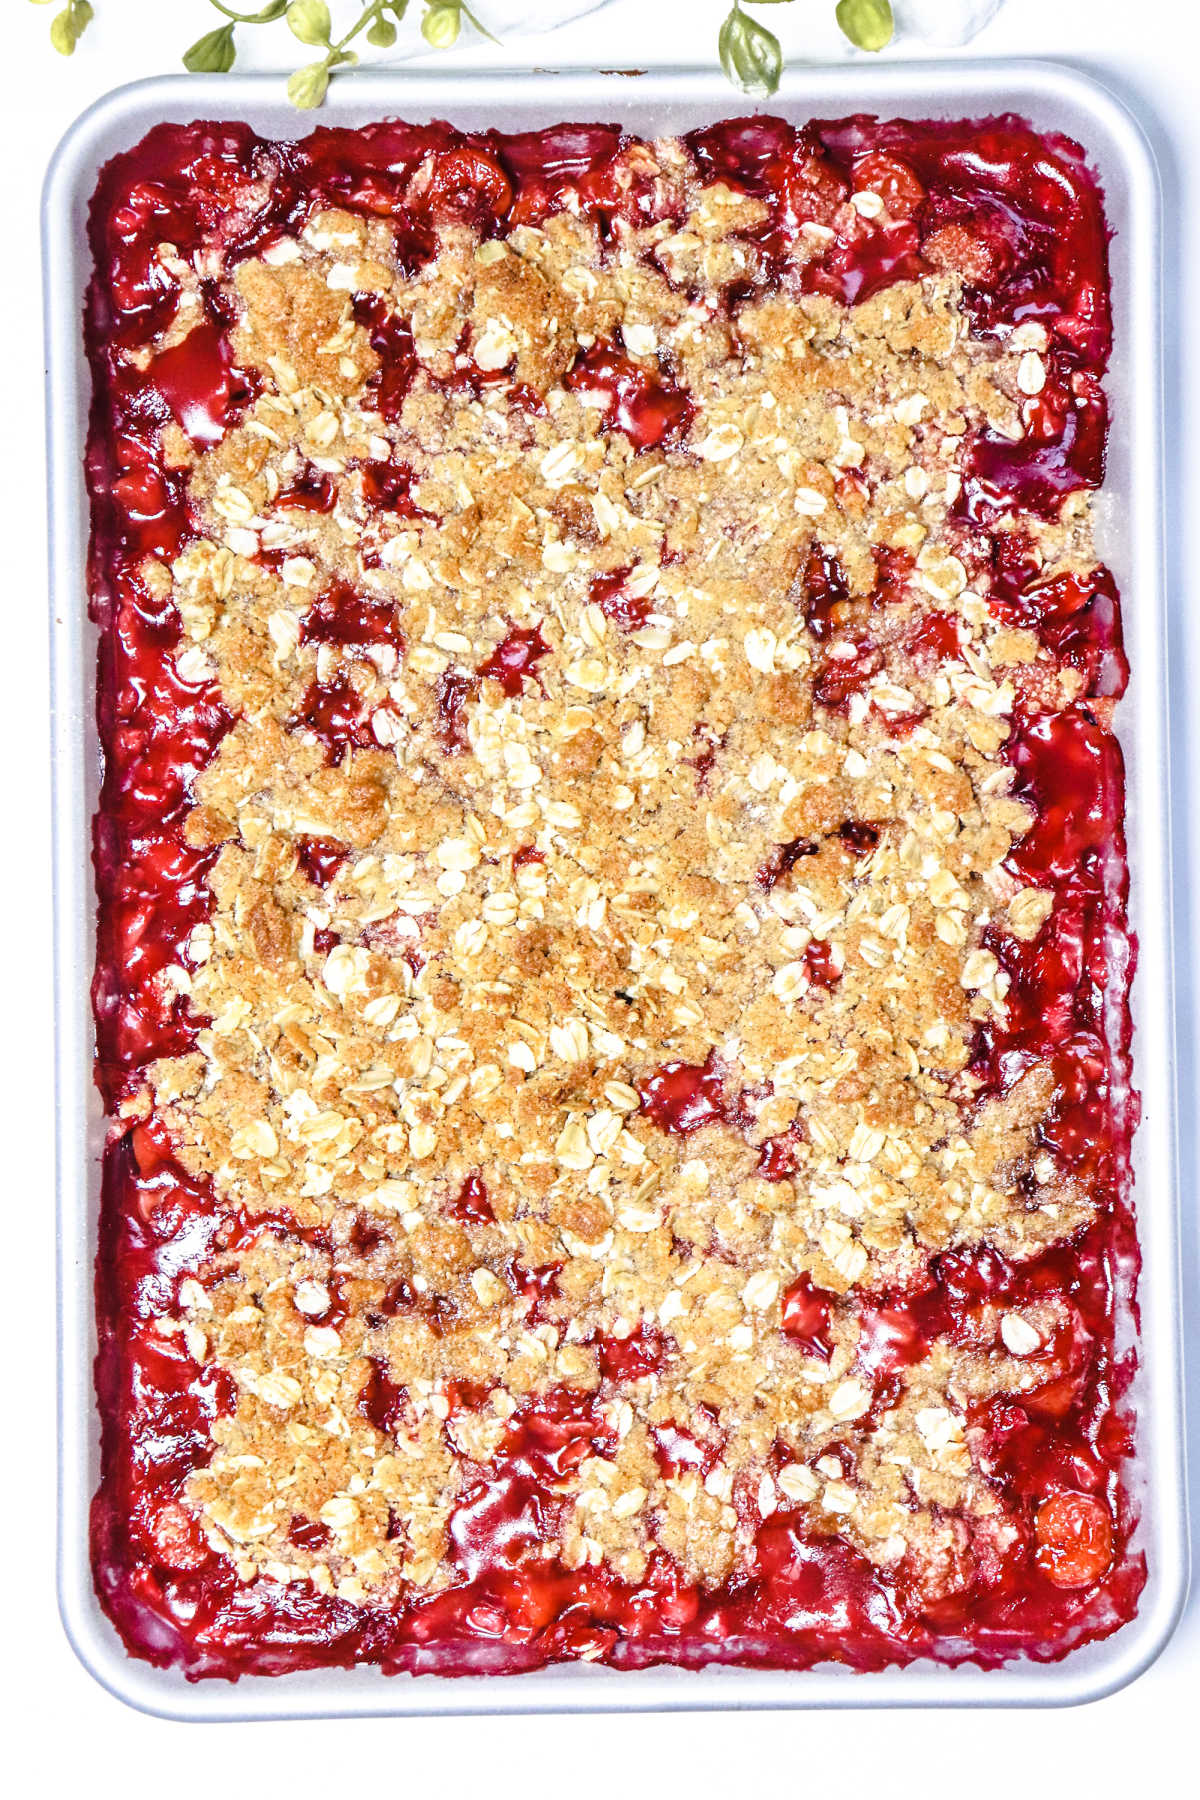 Hot out of the oven cherry crisp recipe